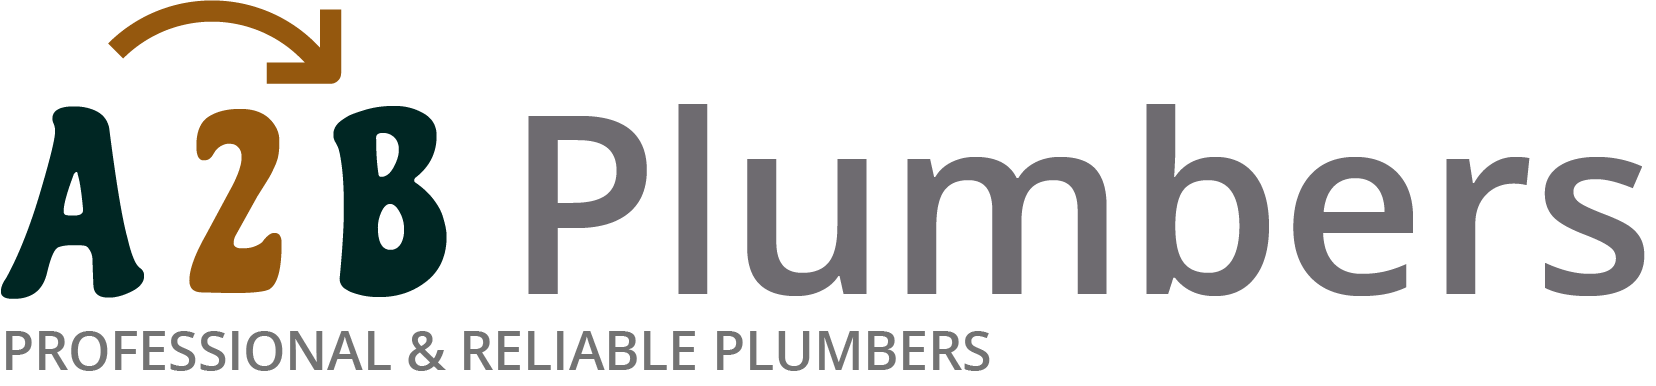 If you need a boiler installed, a radiator repaired or a leaking tap fixed, call us now - we provide services for properties in Westbourne and the local area.